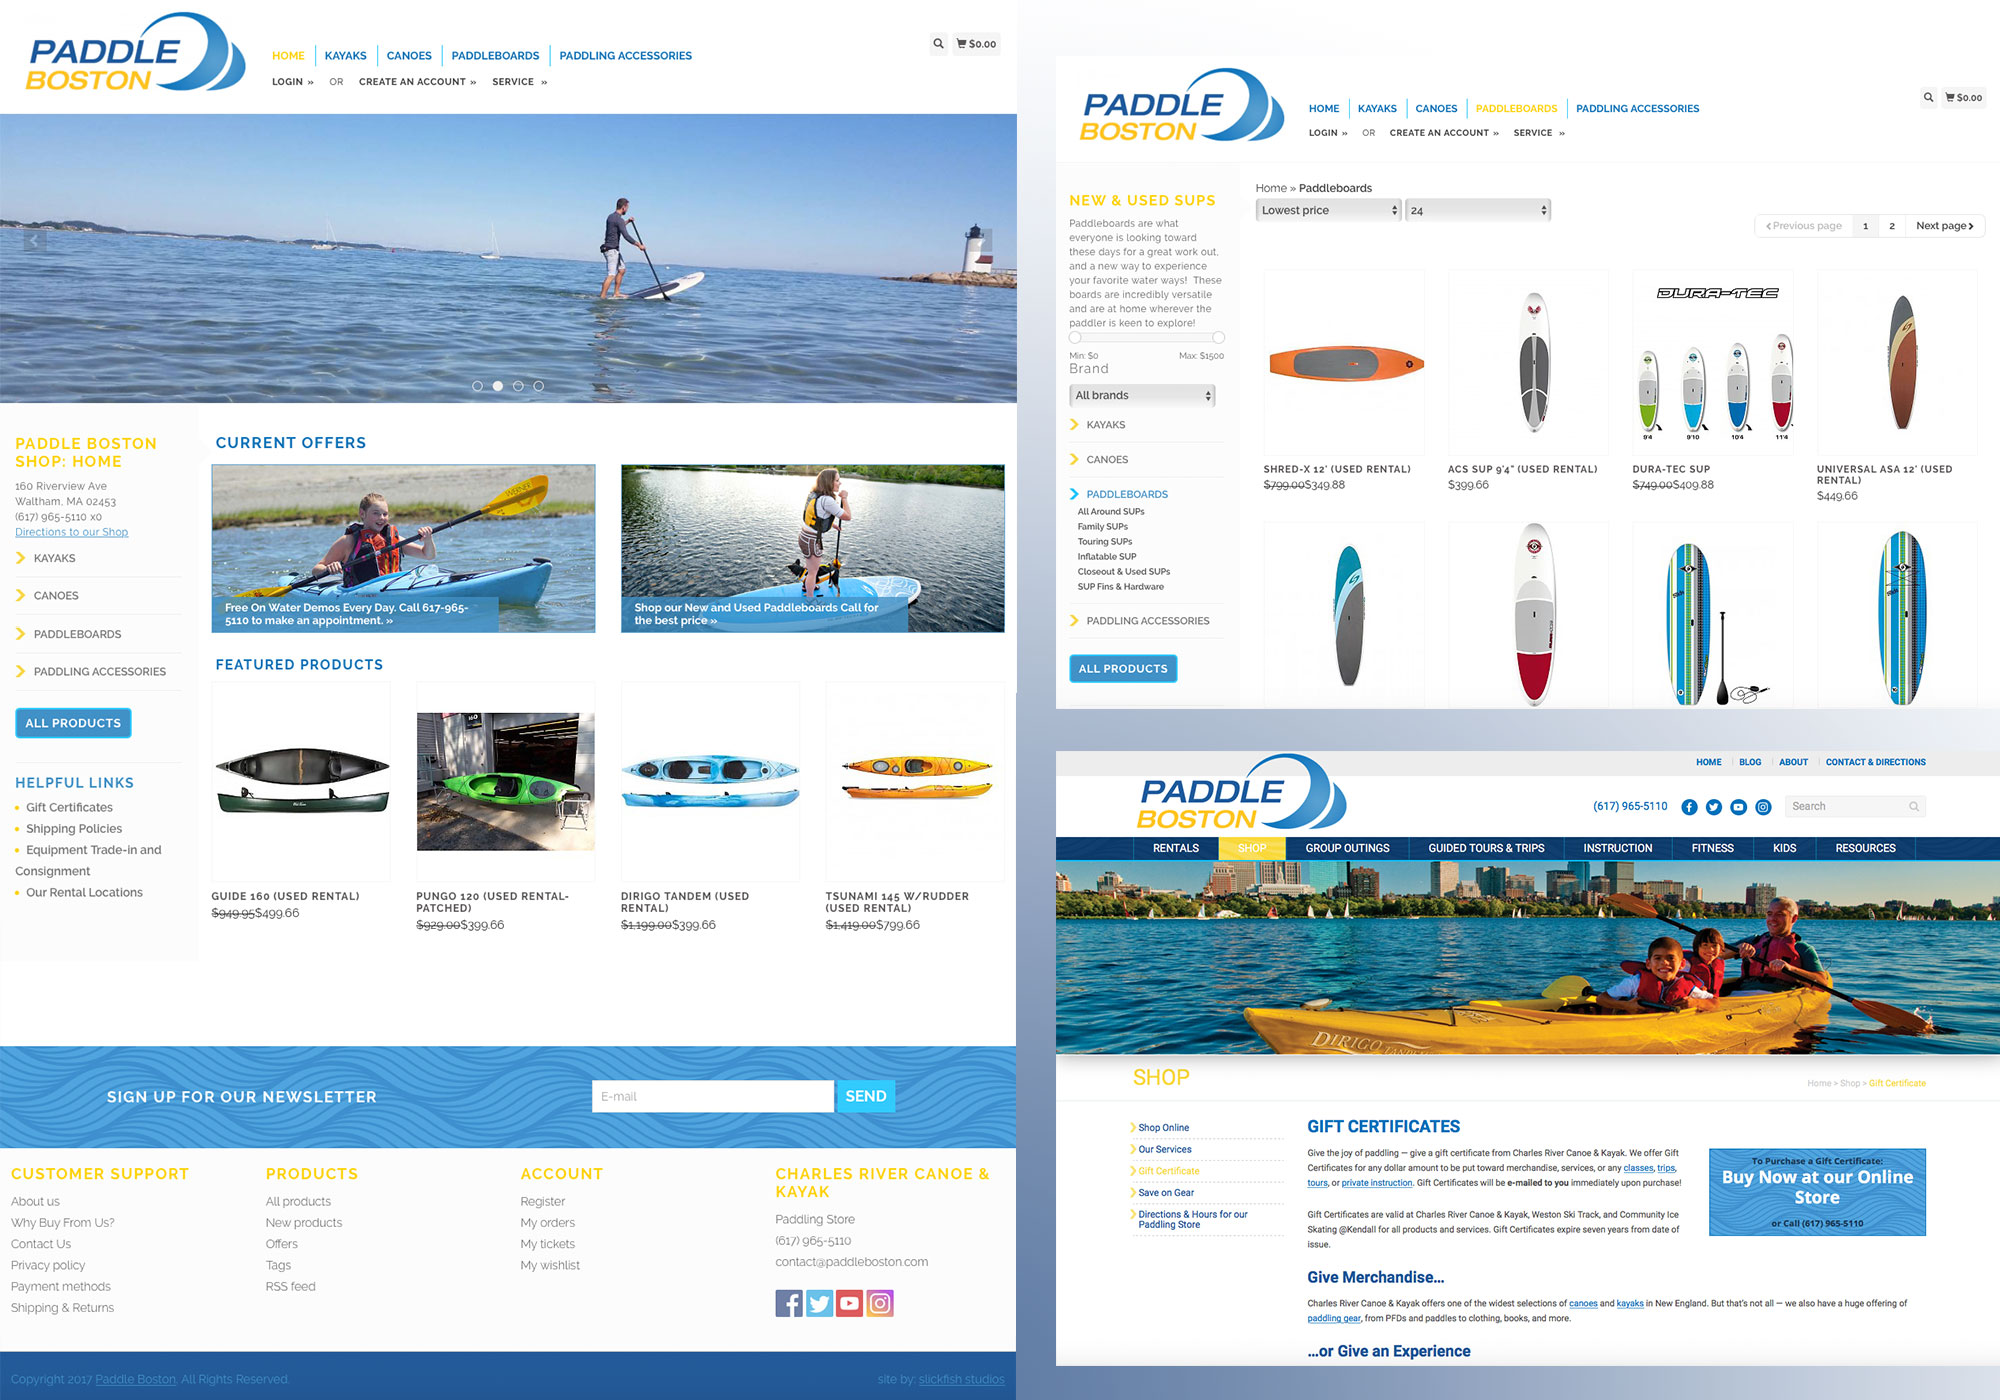 Maine web design company, SlickFish Studios customized an online store for Paddle Boston/Charles River Canoe and Kayak using the Lightspeed software.